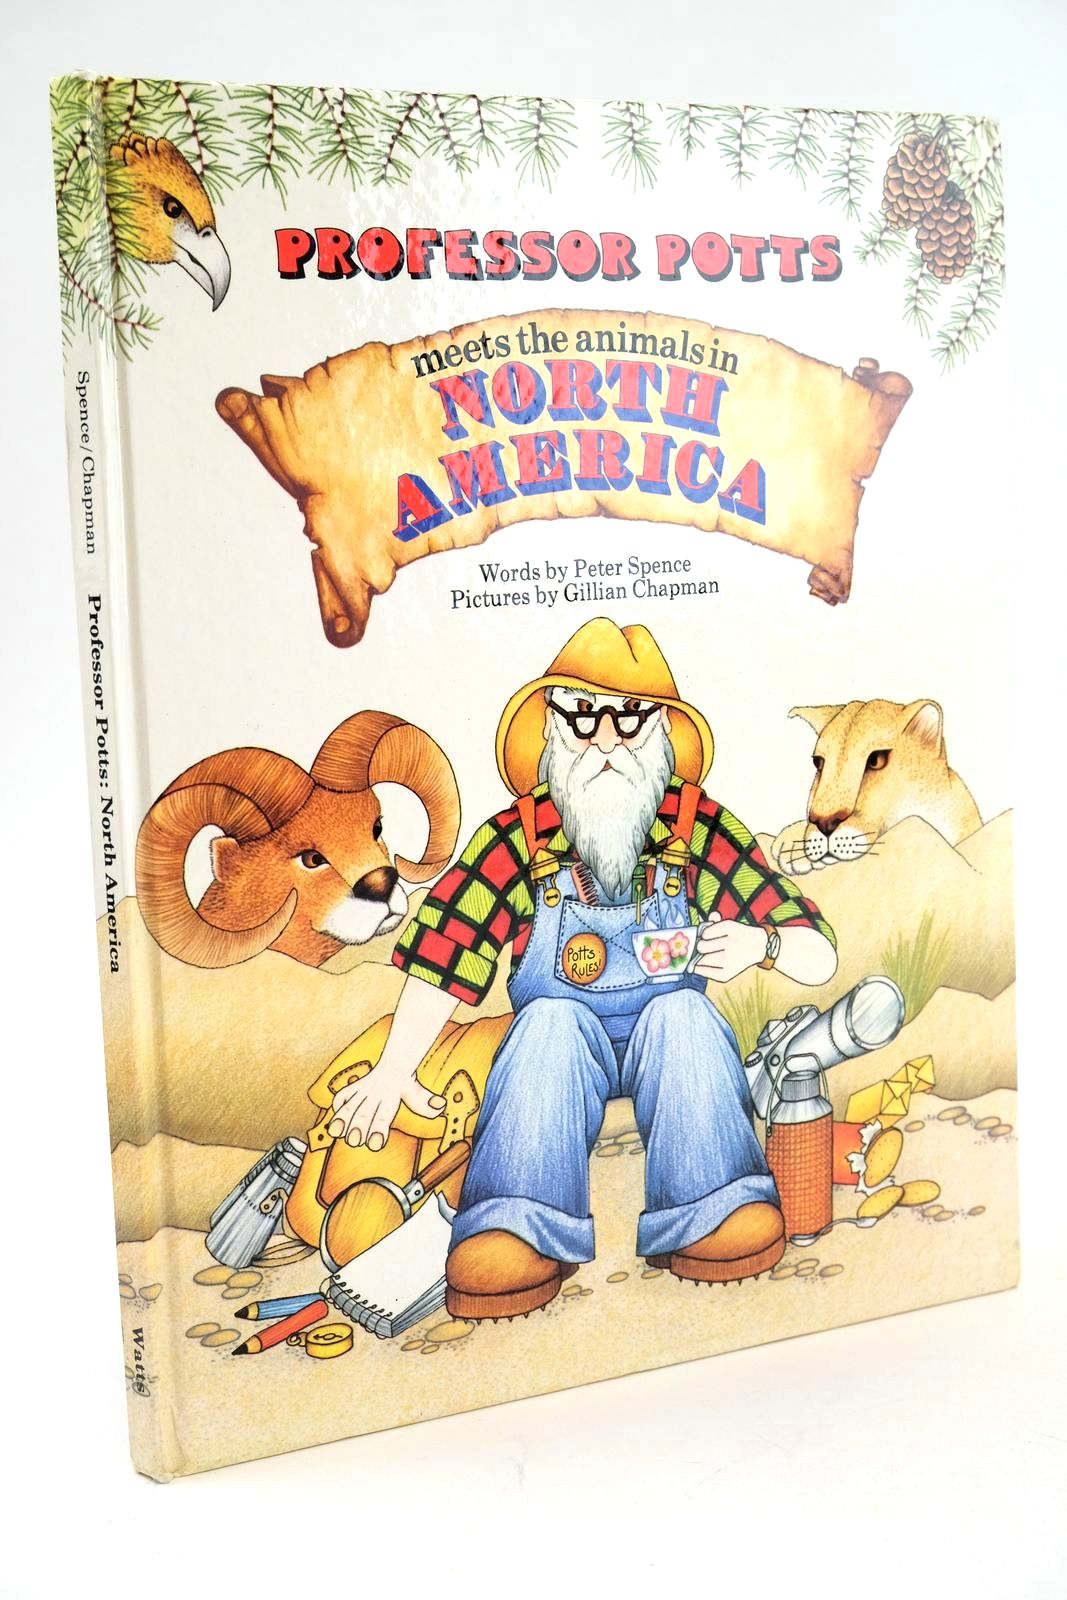 Photo of PROFESSOR POTTS MEETS THE ANIMALS IN NORTH AMERICA written by Spence, Peter illustrated by Chapman, Gillian published by Franklin Watts Ltd. (STOCK CODE: 1325051)  for sale by Stella & Rose's Books